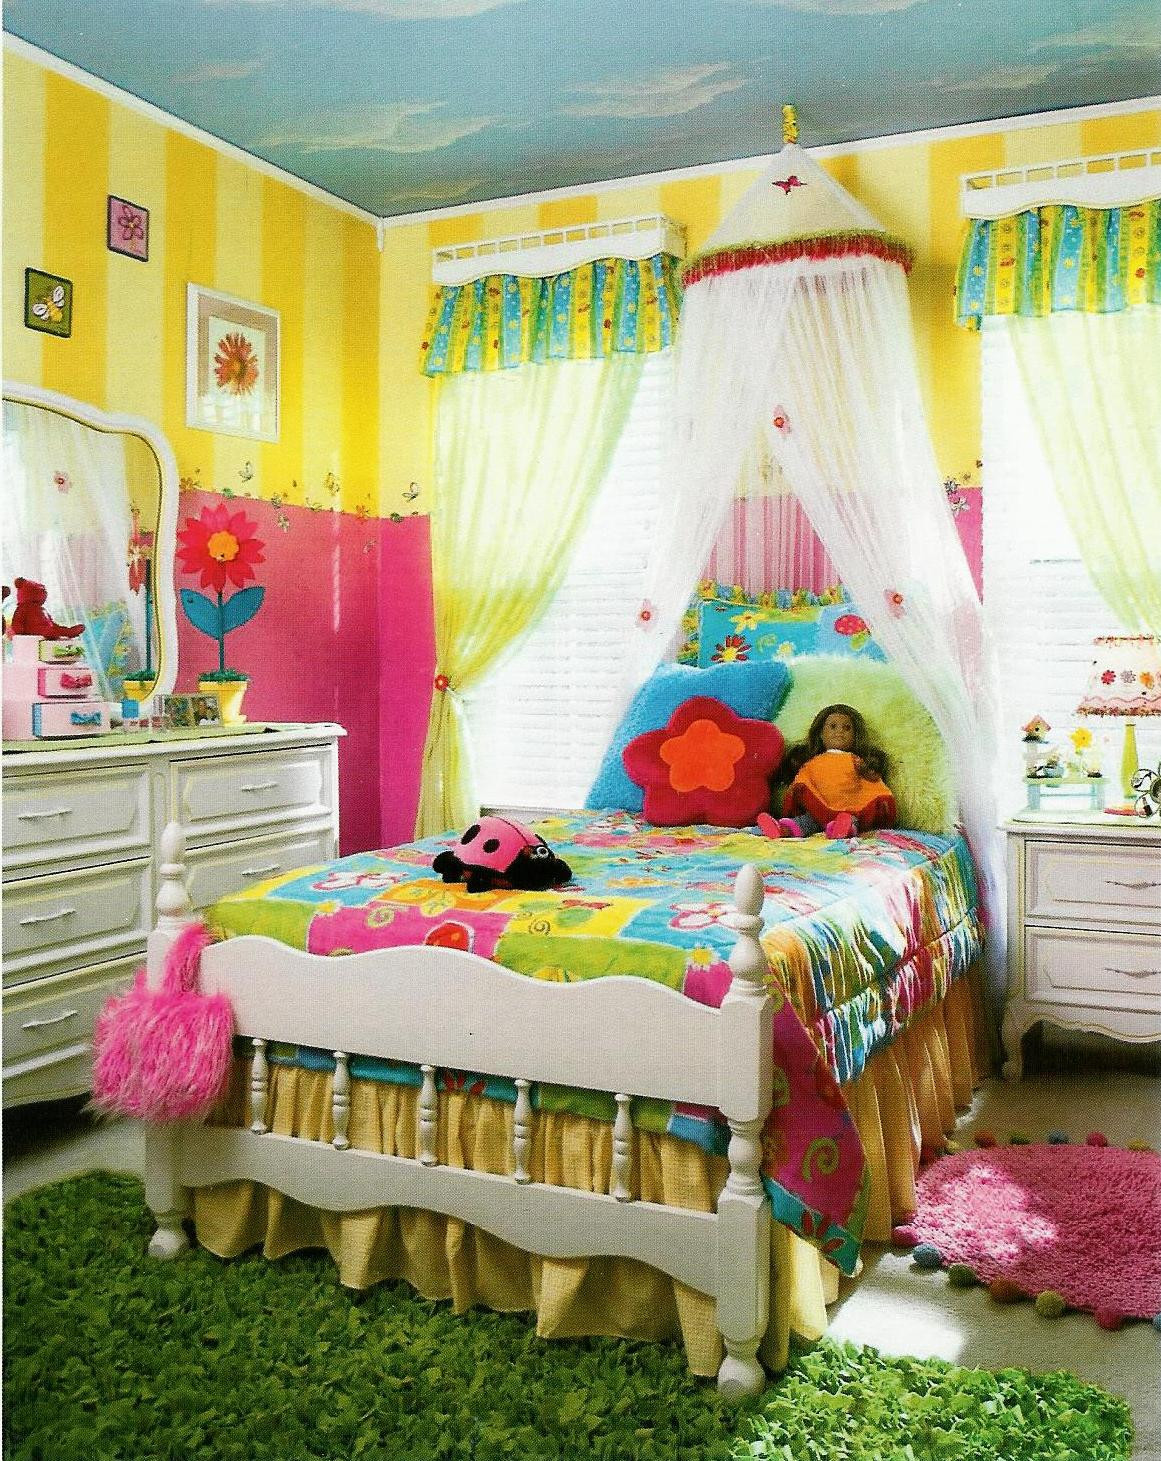 Kids Bedroom Decor
 Tips for Decorating Kid’s Rooms